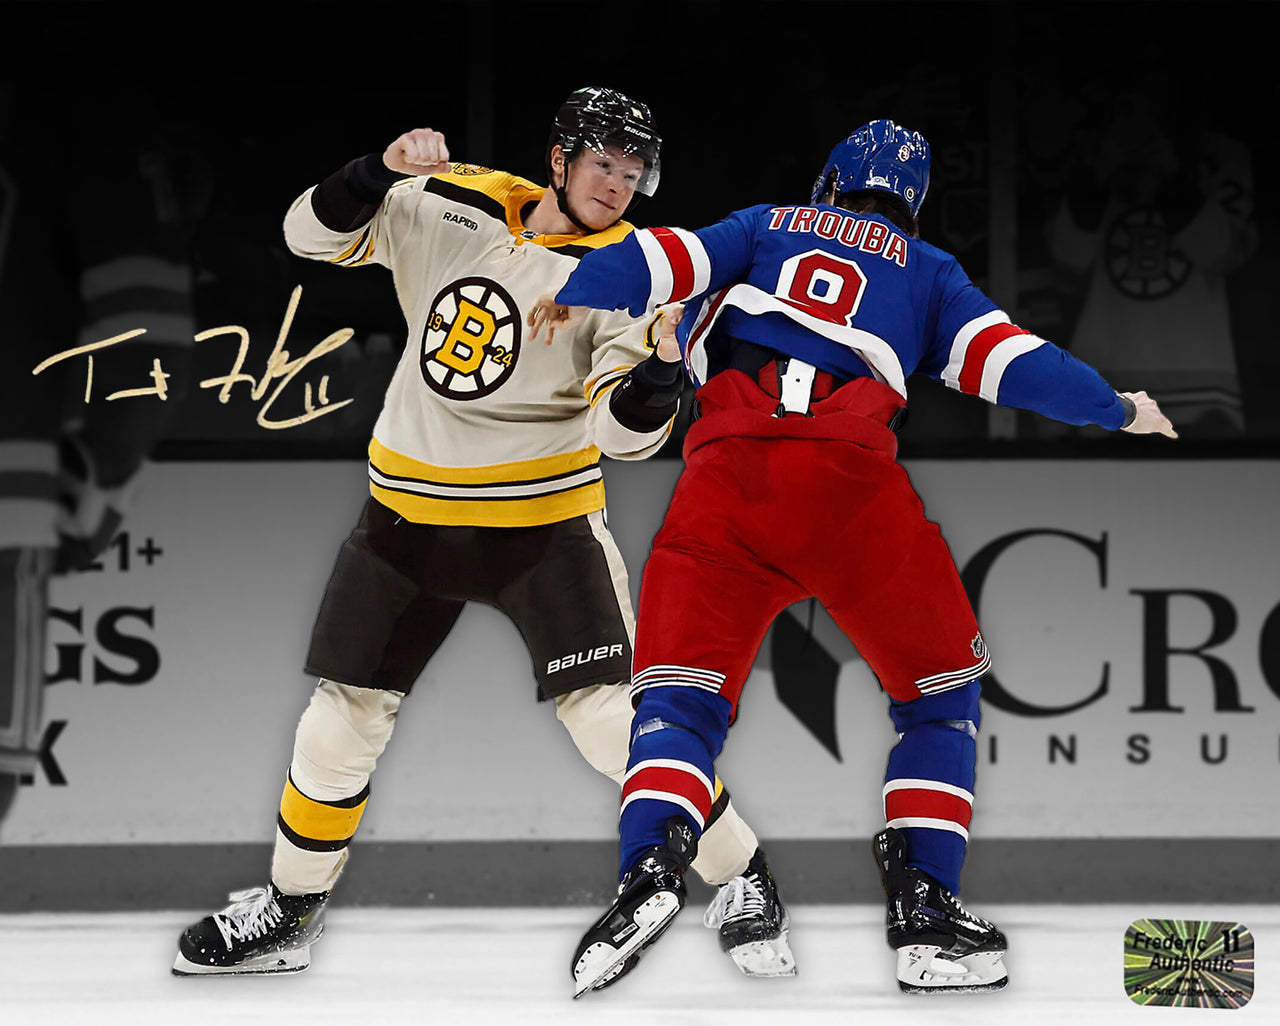 Trent Frederic Fighting Action Boston Bruins Autographed 8" x 10" Hockey Photo